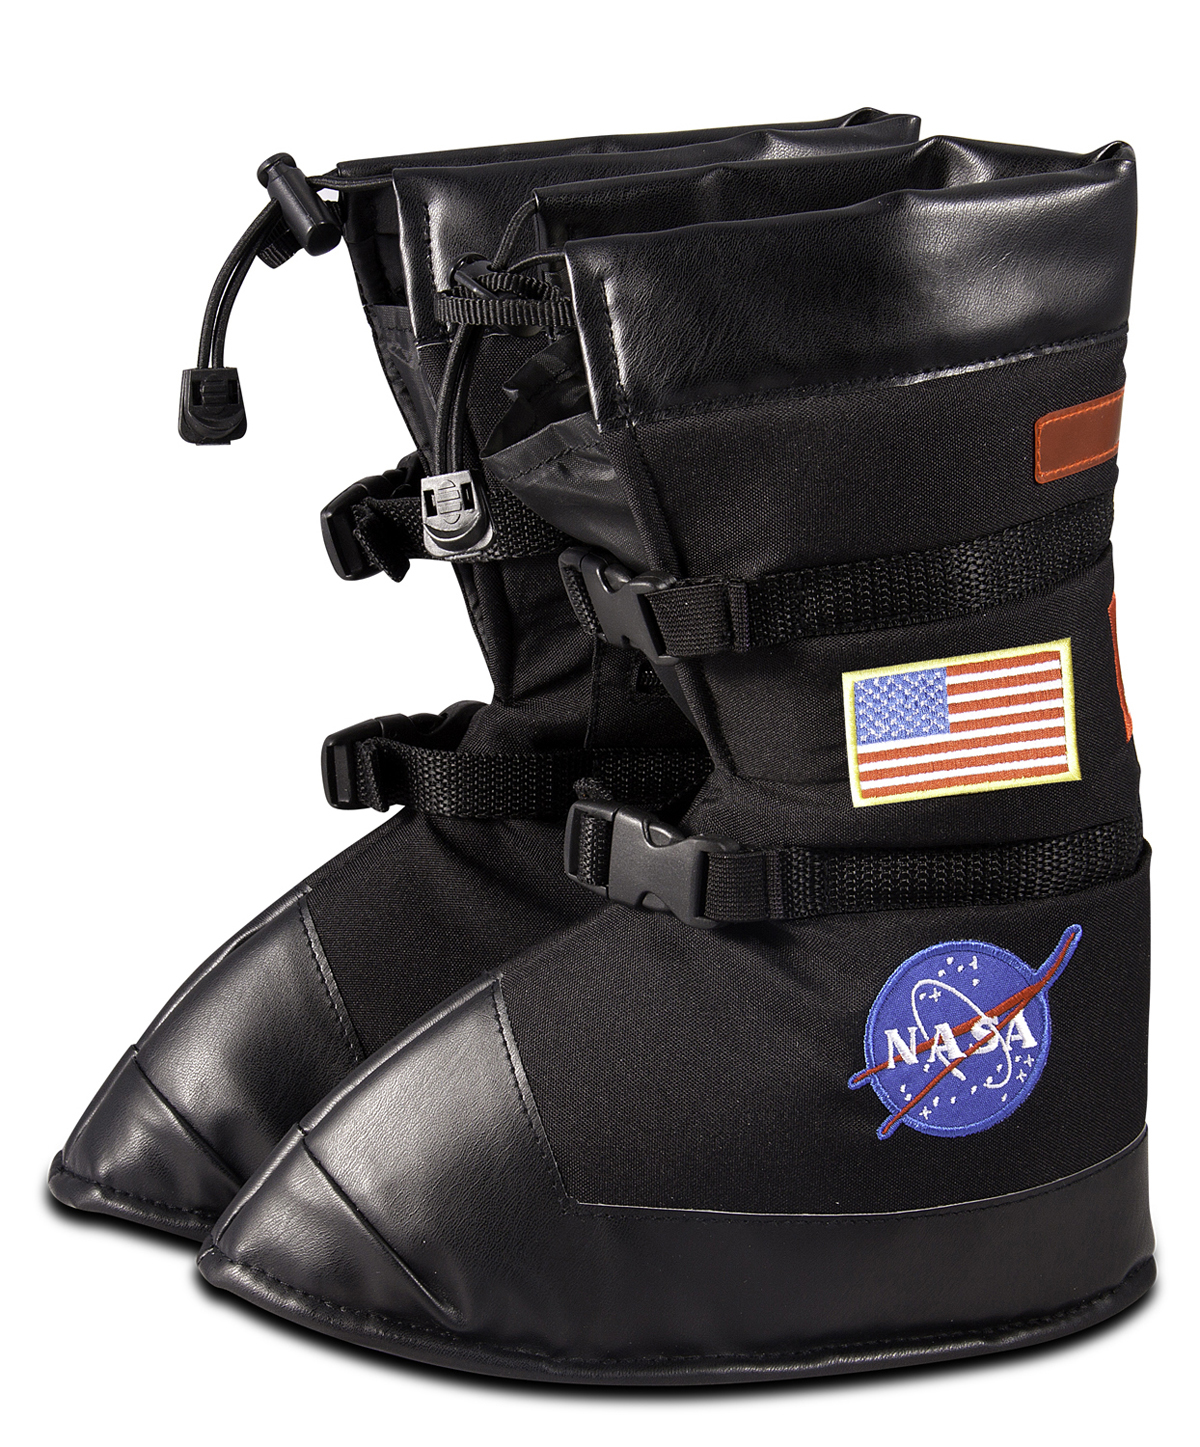 Wholesale Astronaut Boots, Black - Small(2x.38)